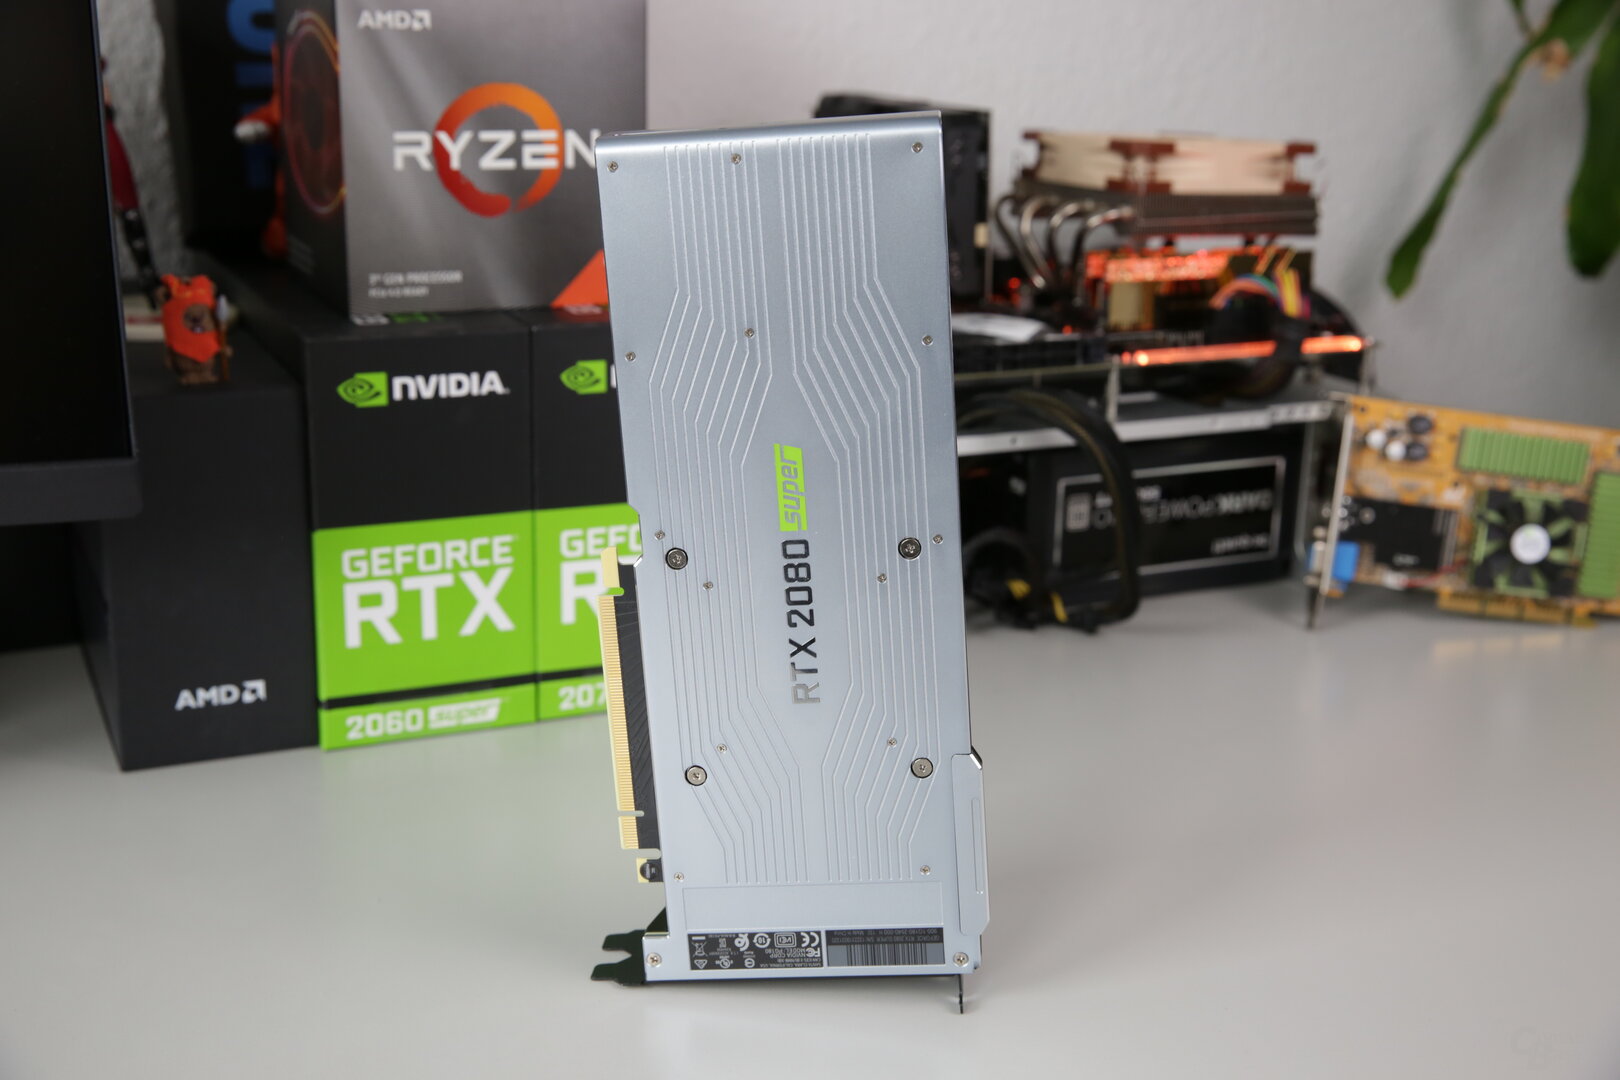 Nvidia GeForce RTX 2080 Super FE in the test